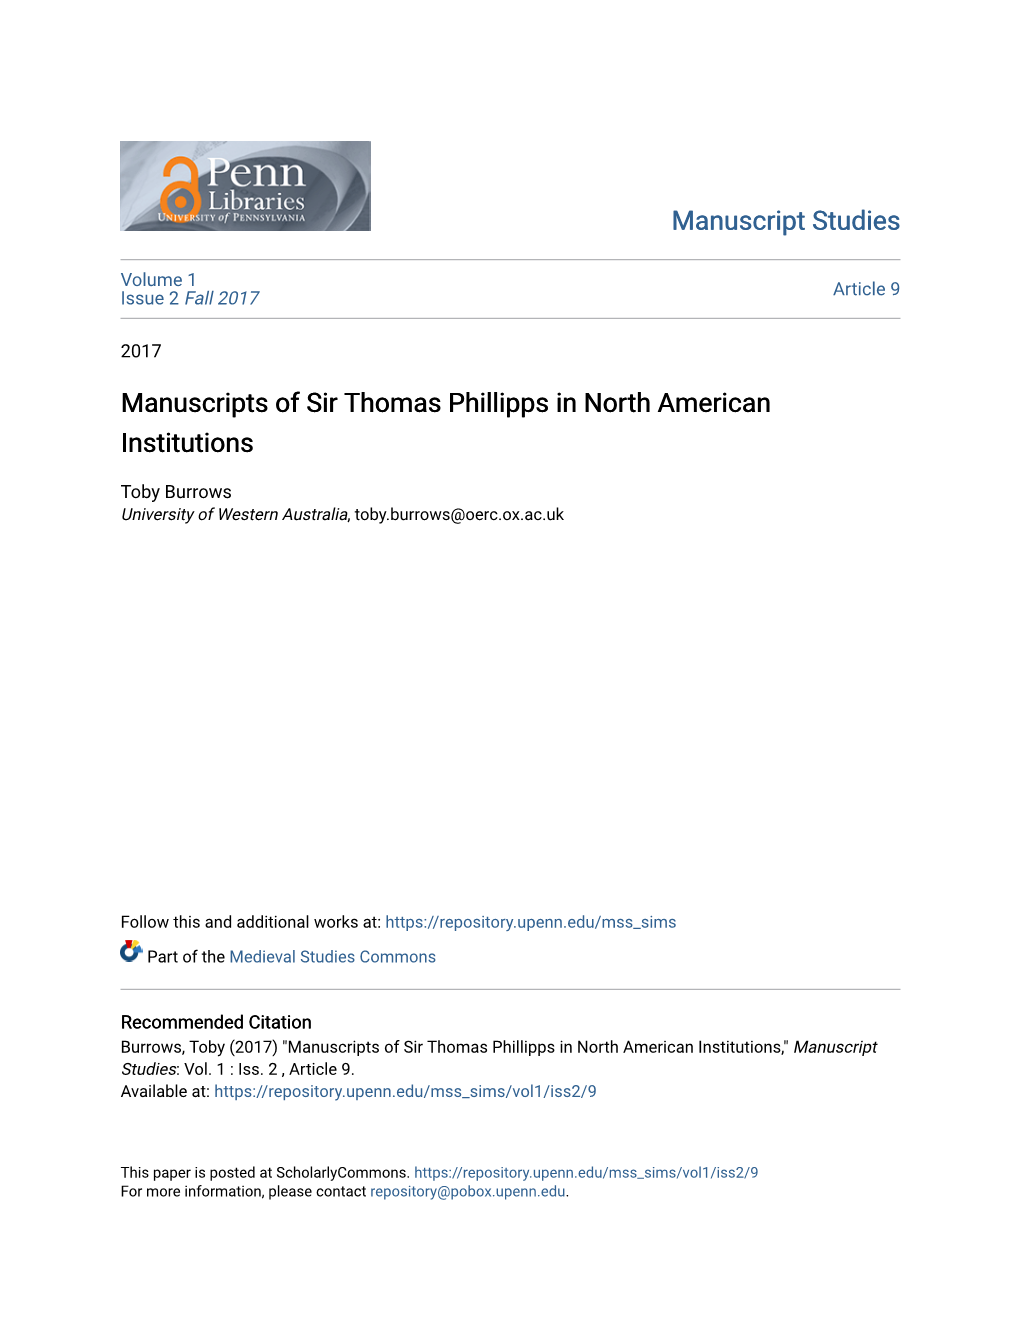 Manuscripts of Sir Thomas Phillipps in North American Institutions